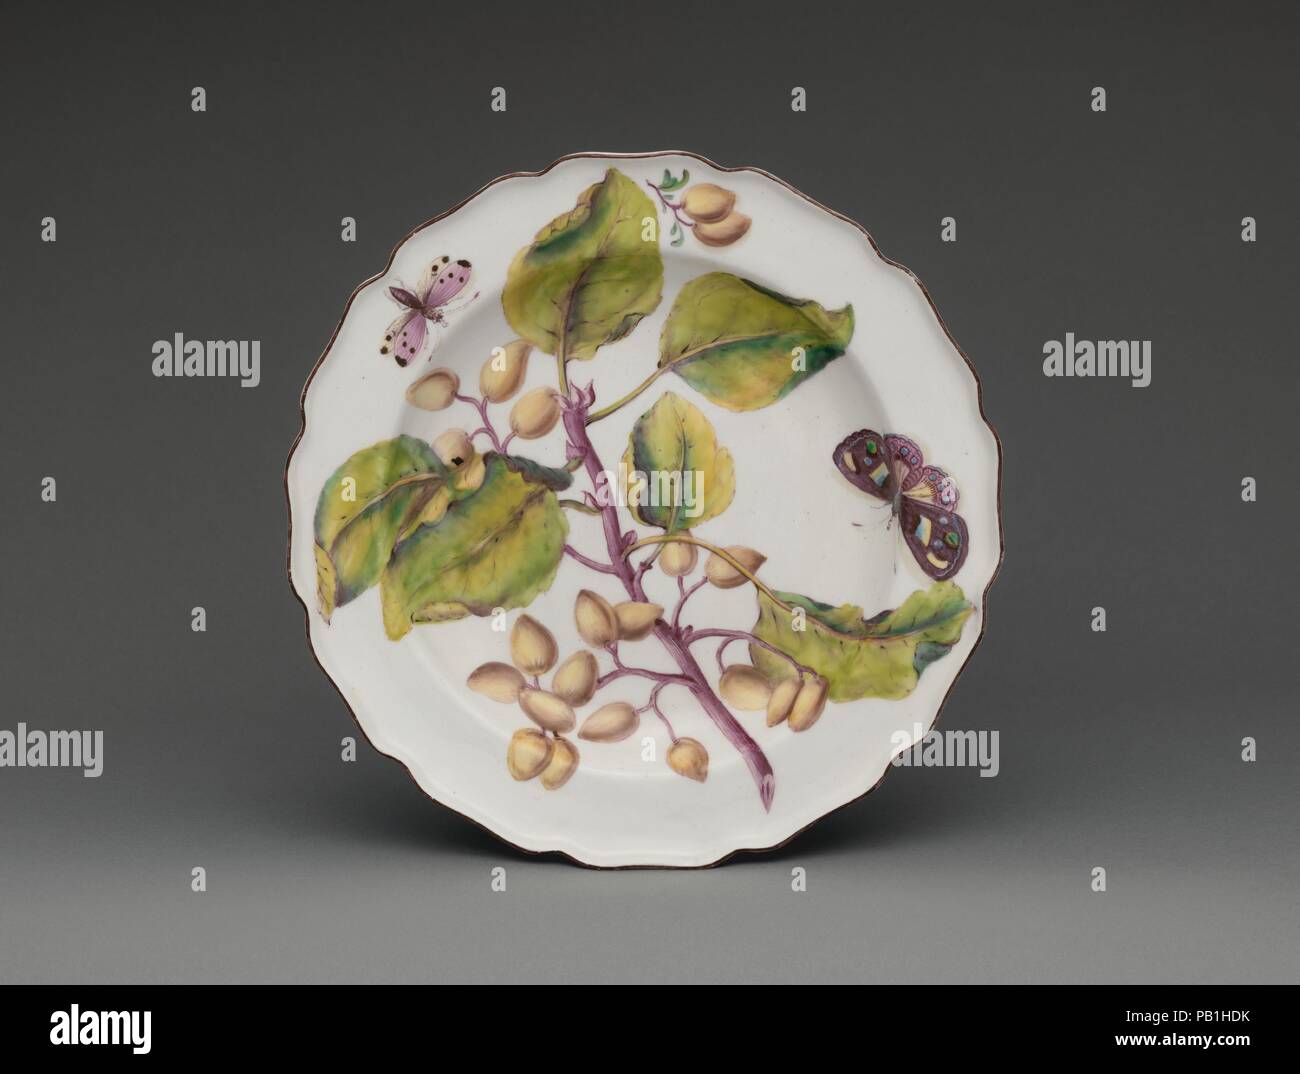 Botanical plate with spray of fruiting Indian Bean Tree. Culture: British, Chelsea. Dimensions: Overall (confirmed): 1 9/16 × 9 1/8 × 9 1/8 in., 1 lb. (4 × 23.2 × 23.2 cm, 0.5 kg). Maker: Chelsea Porcelain Manufactory (British, 1745-1784, Red Anchor Period, ca. 1753-58). Date: ca. 1755.  These botanical plates (2016.217-.226) were produced by the Chelsea factory around 1755 and are often referred to as Chelsea 'Hans Sloane' wares, in reference to the royal physician, traveler, and natural historian who helped transform the Chelsea Physik Garden into a center of botanical knowledge during the B Stock Photo